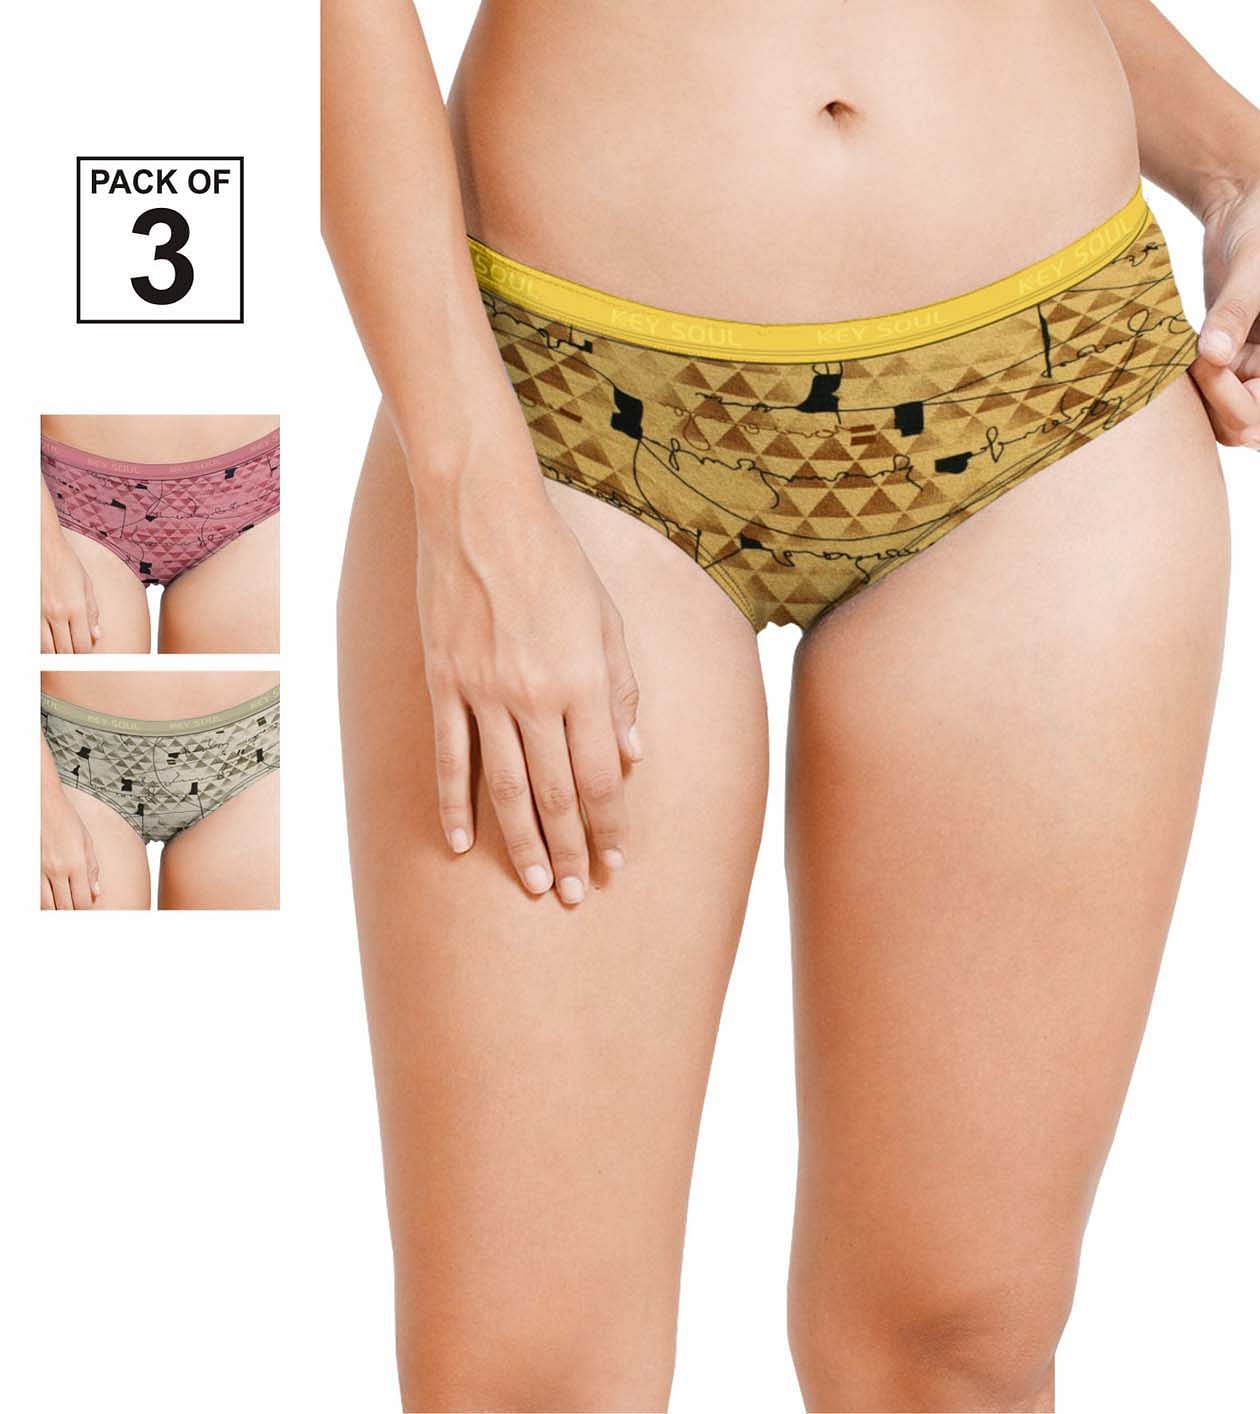 Printed Outer Elastic Panty Pack of 3 - KS002 - Pack - 29 - 3xl/105